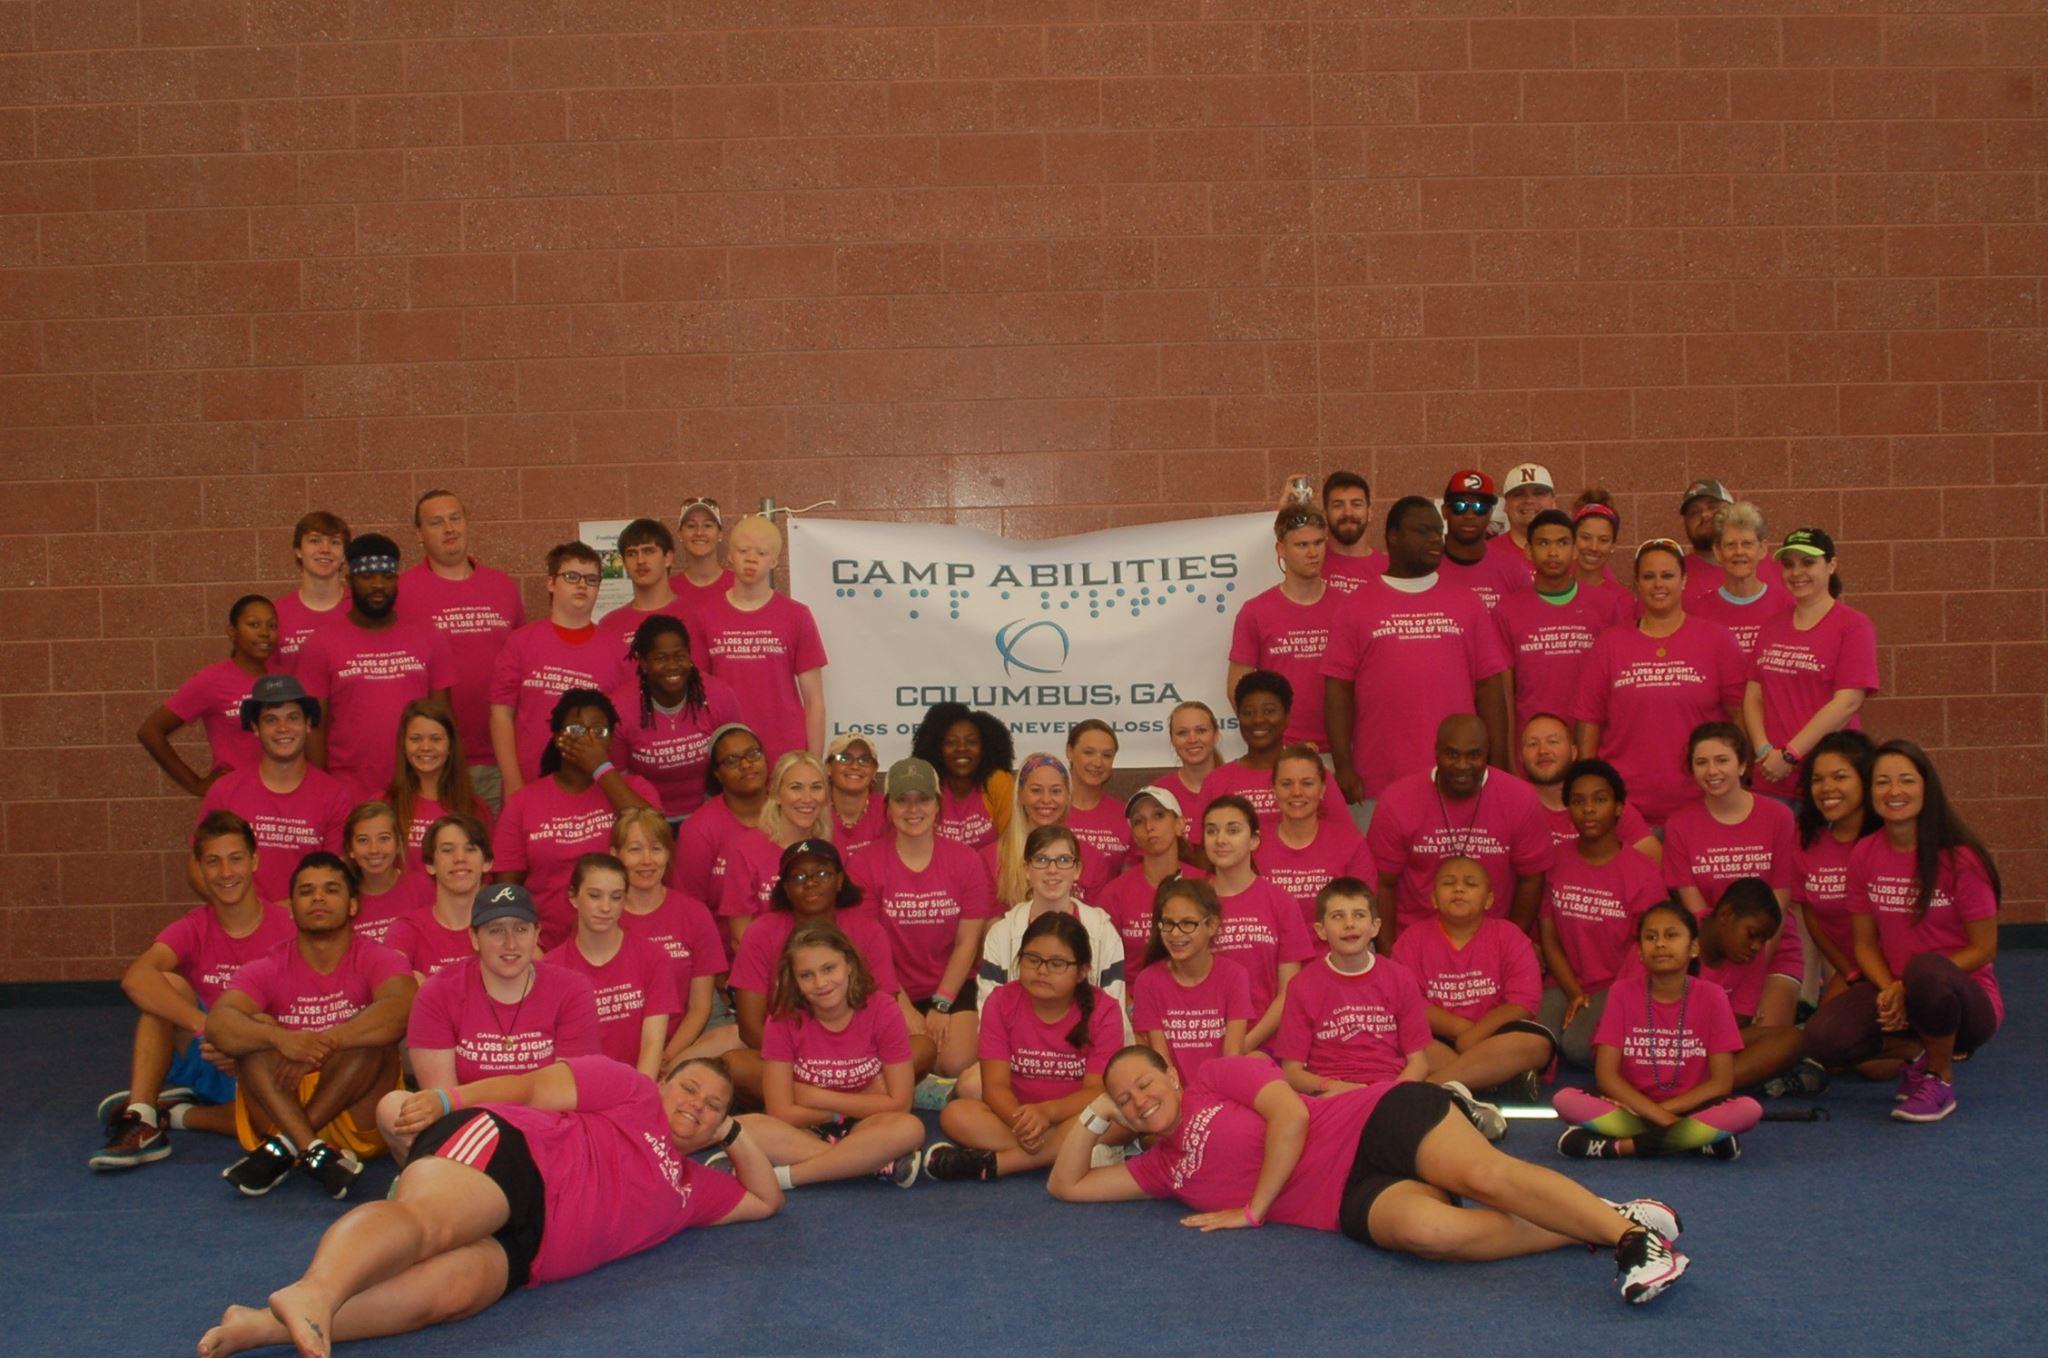 group photo of the 2017 Camp Abilities campers posing with a large sign of the Camp Abilities logo